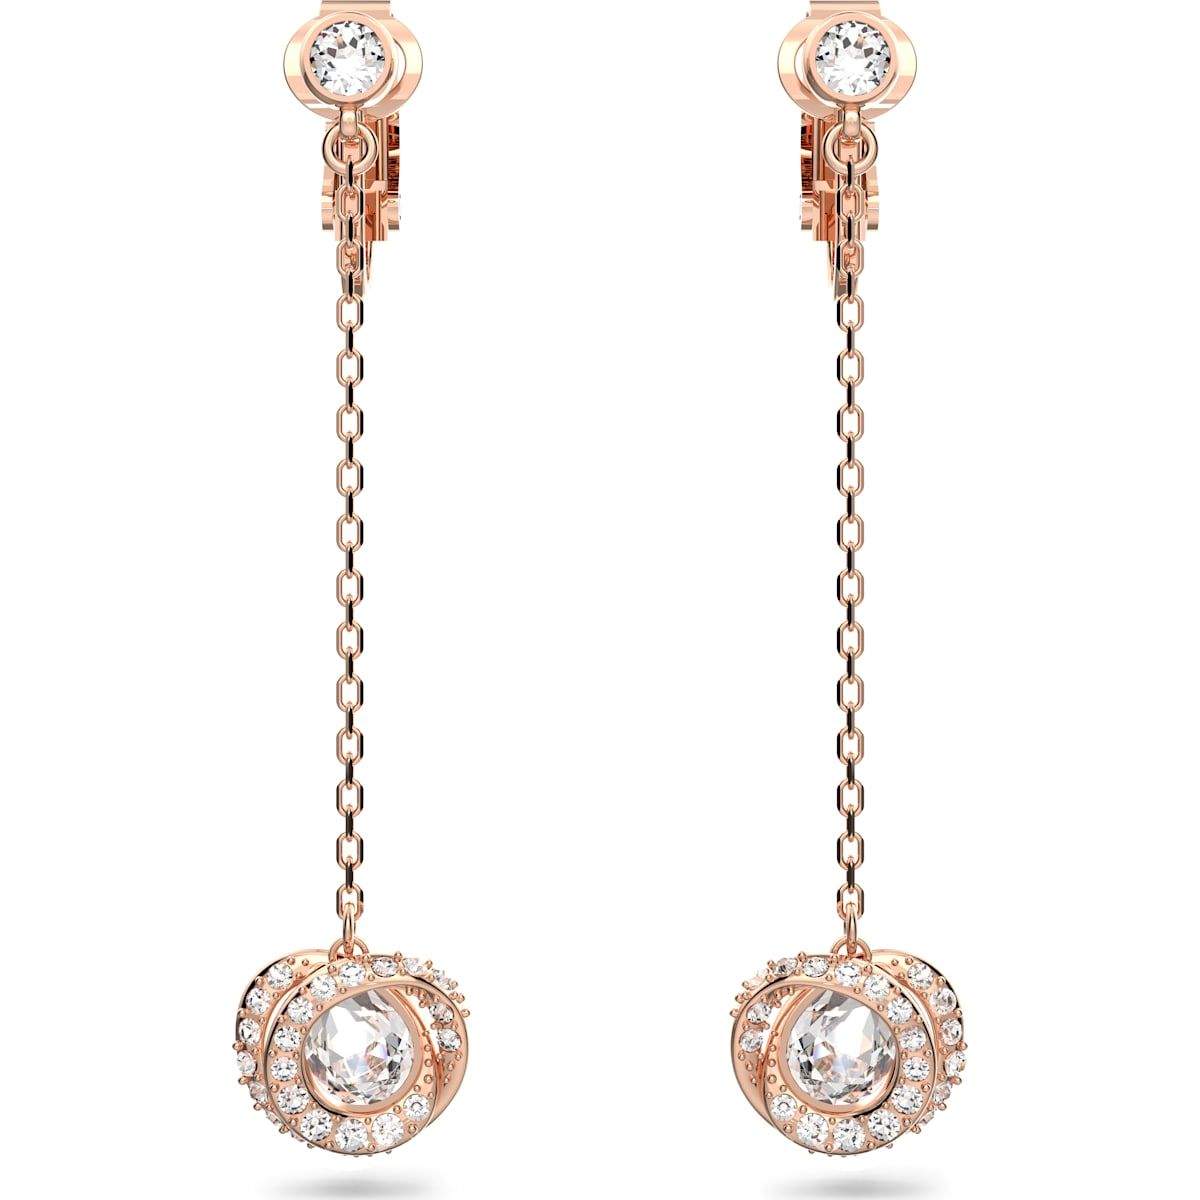 Swarovski Generation Rose Gold Tone Plated Long White Crystal Clip Earrings D